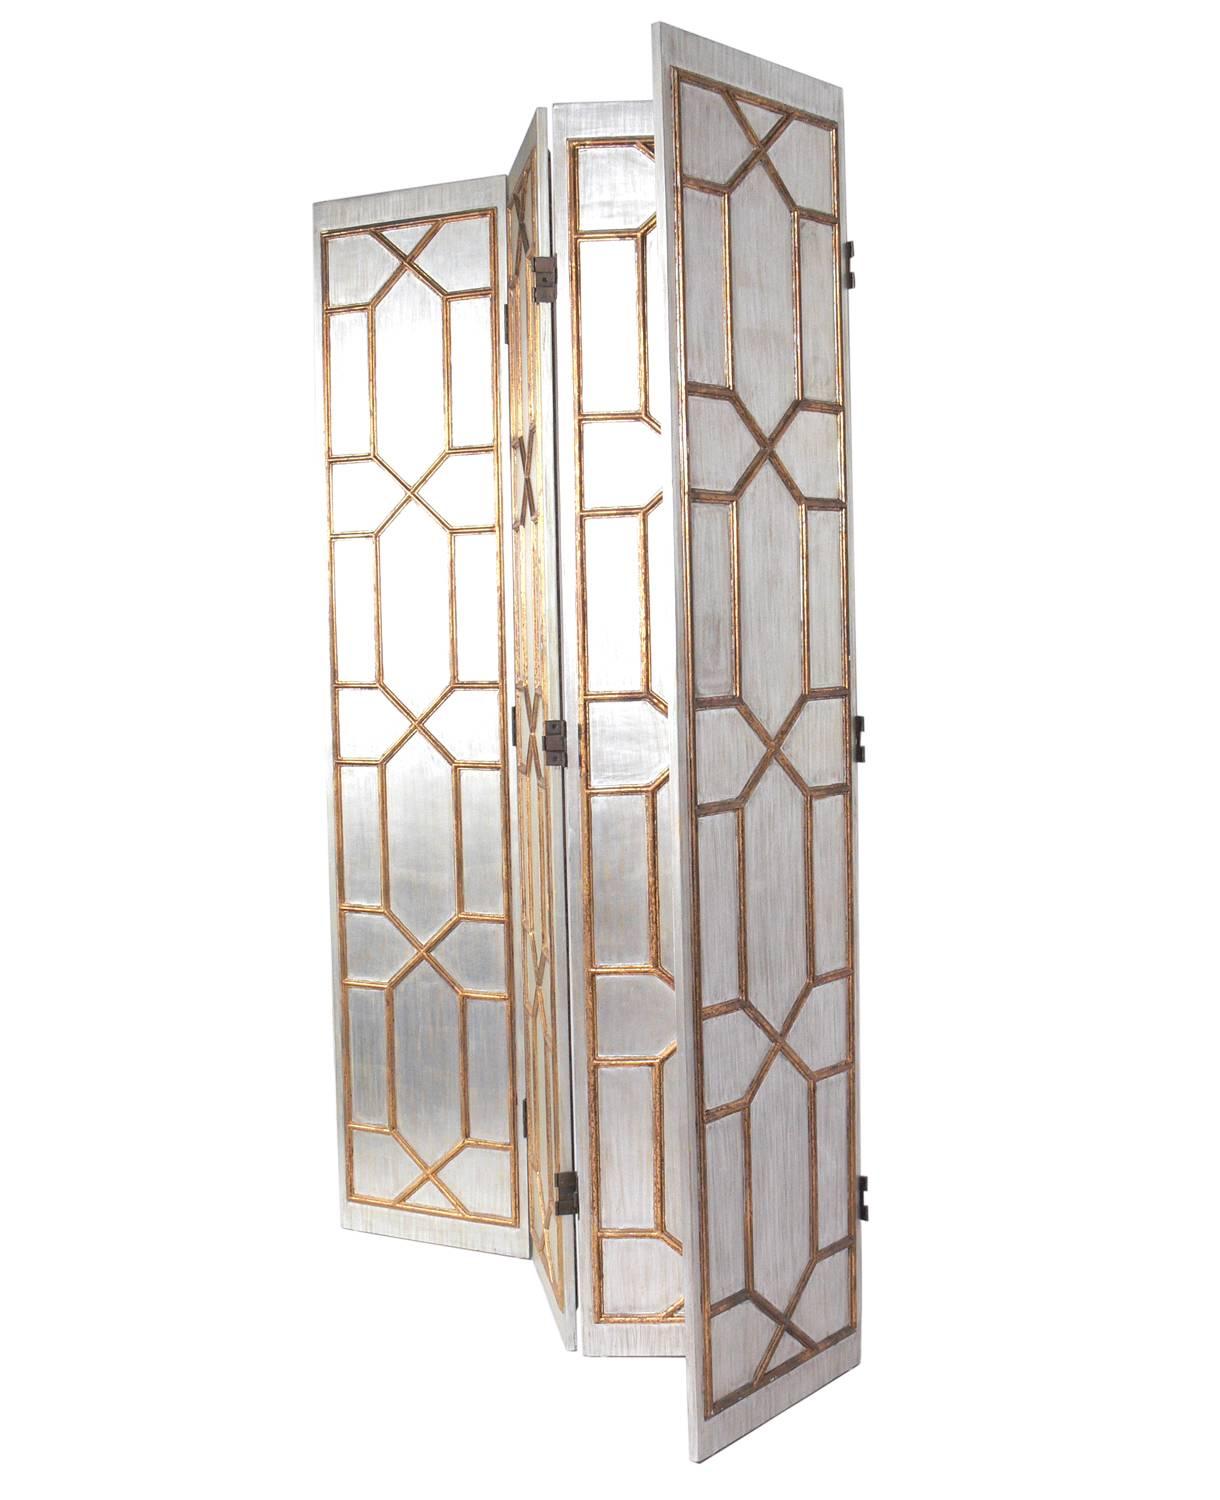 American Glamorous Silver and Gold Gilt Folding Screen